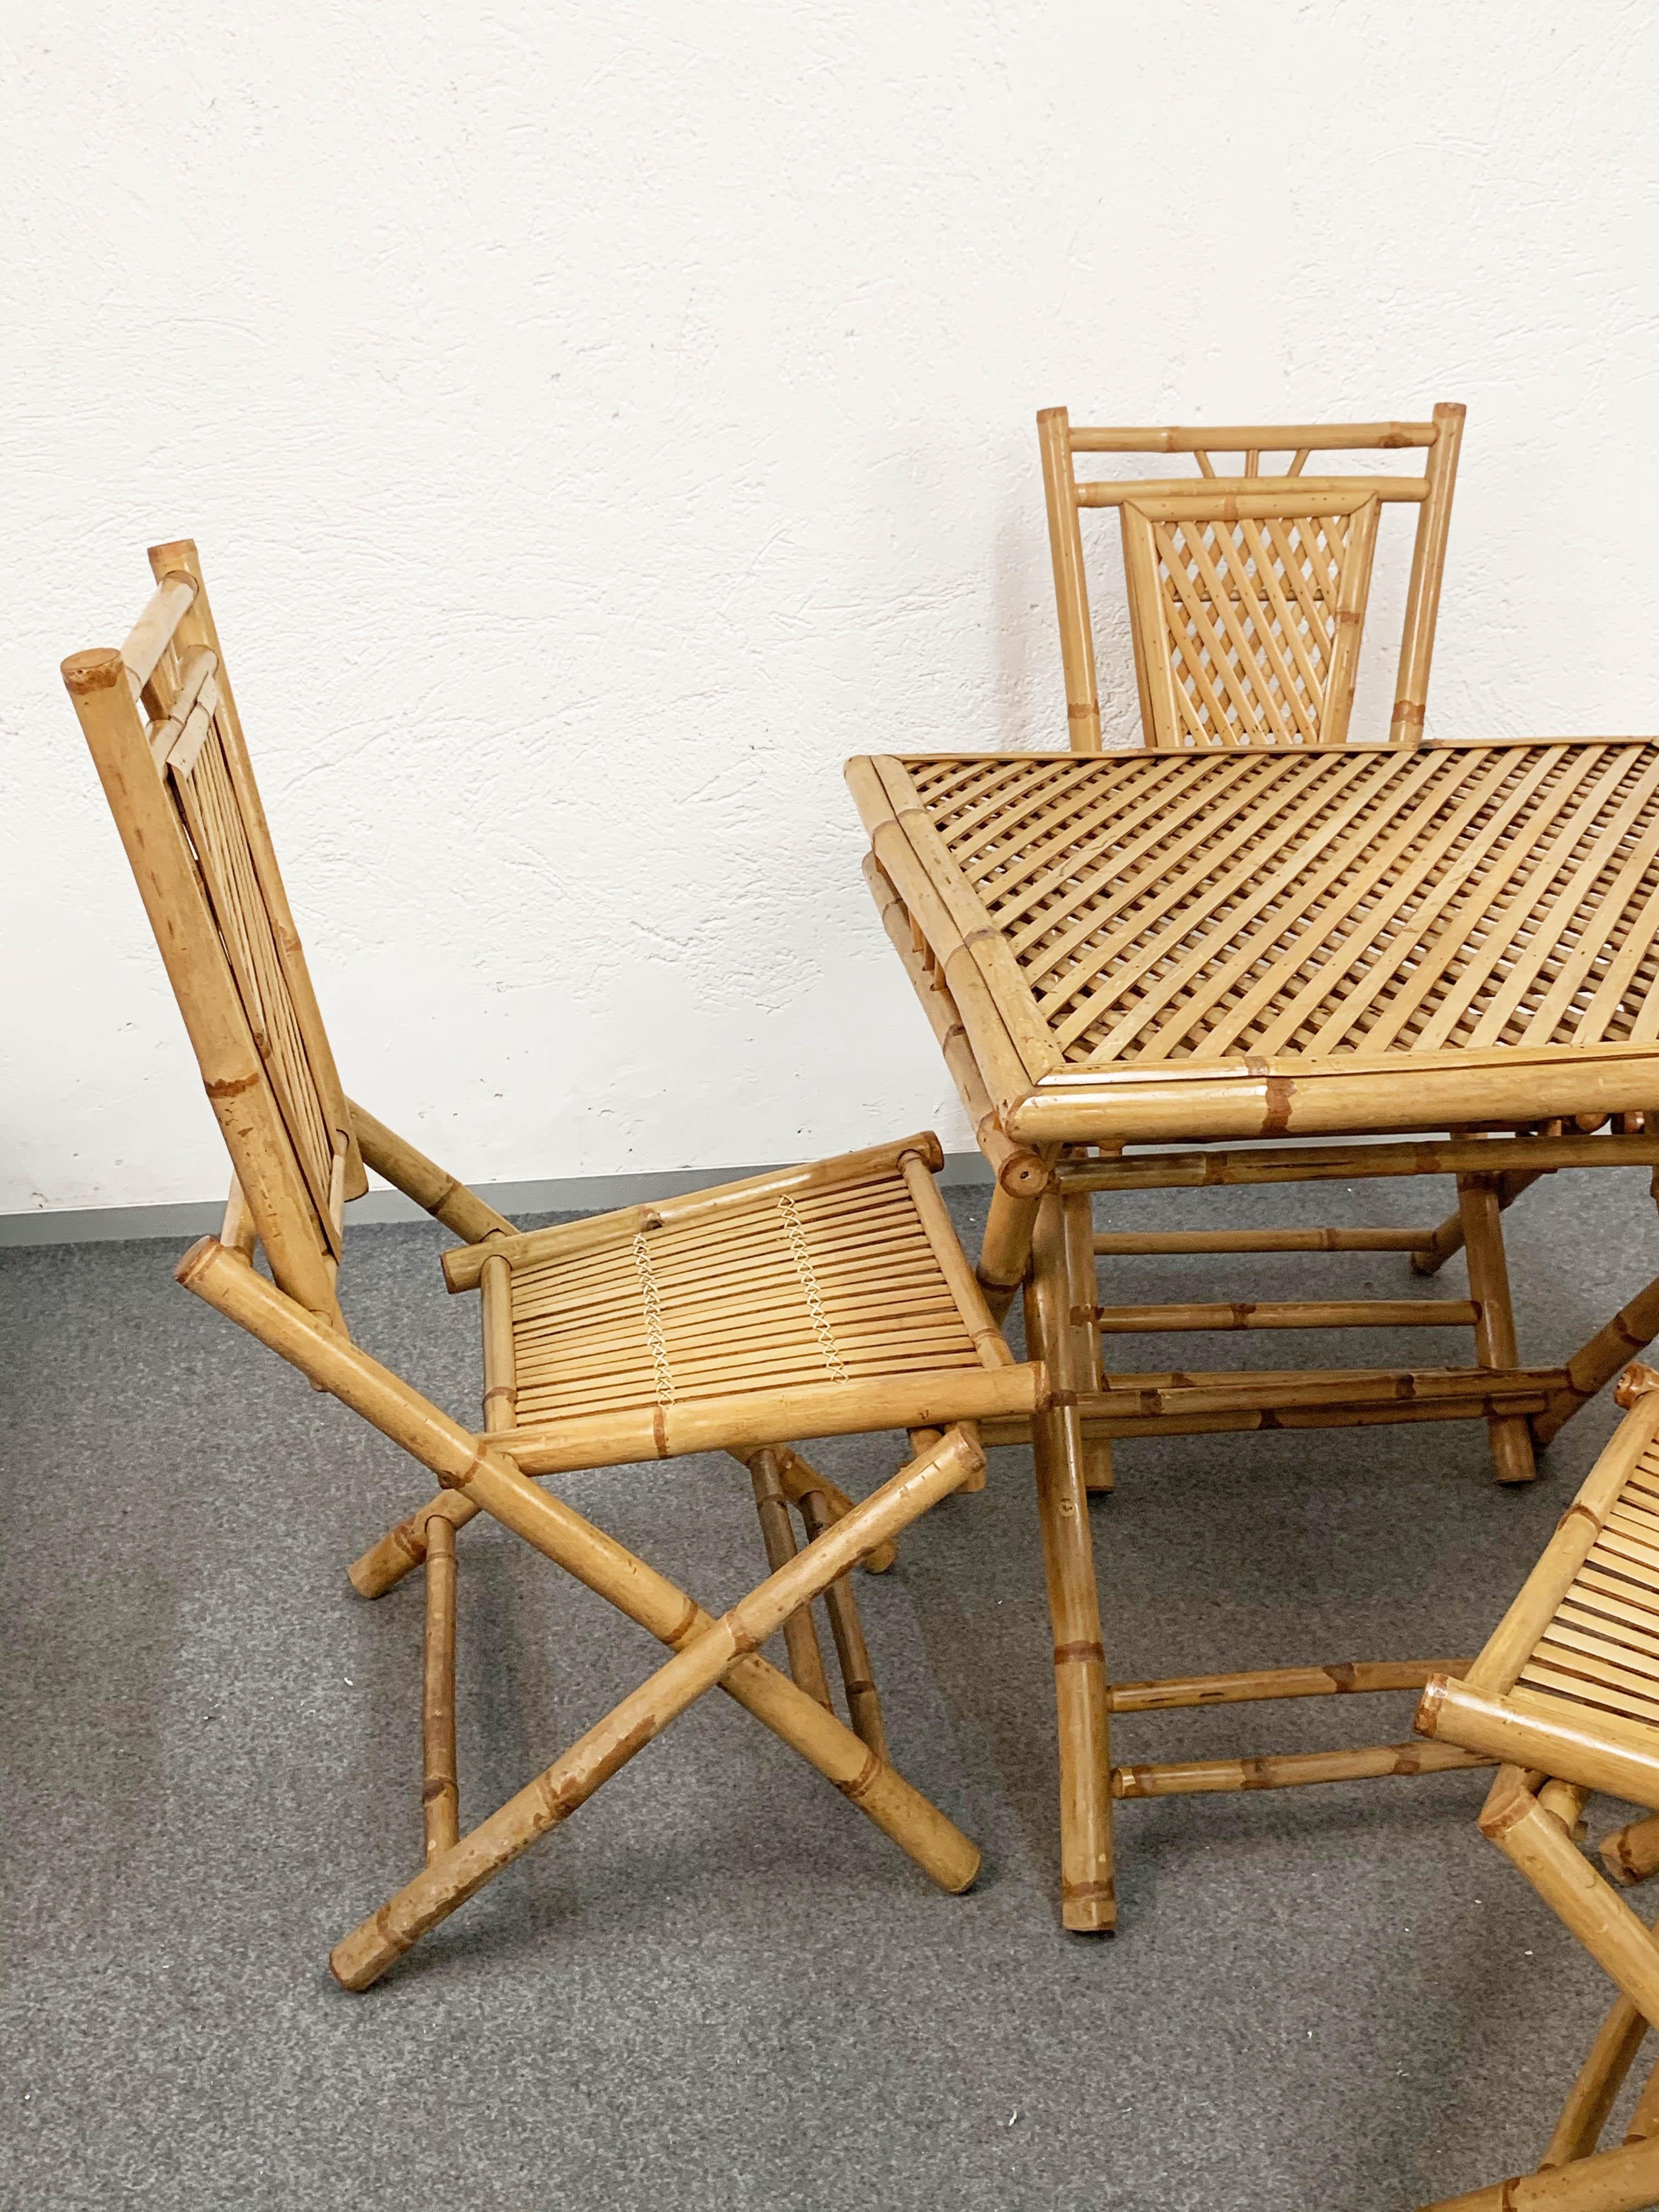 Mid-20th Century Midcentury Bamboo and Rattan Italian Foldable Table and Four Chairs, 1960s For Sale